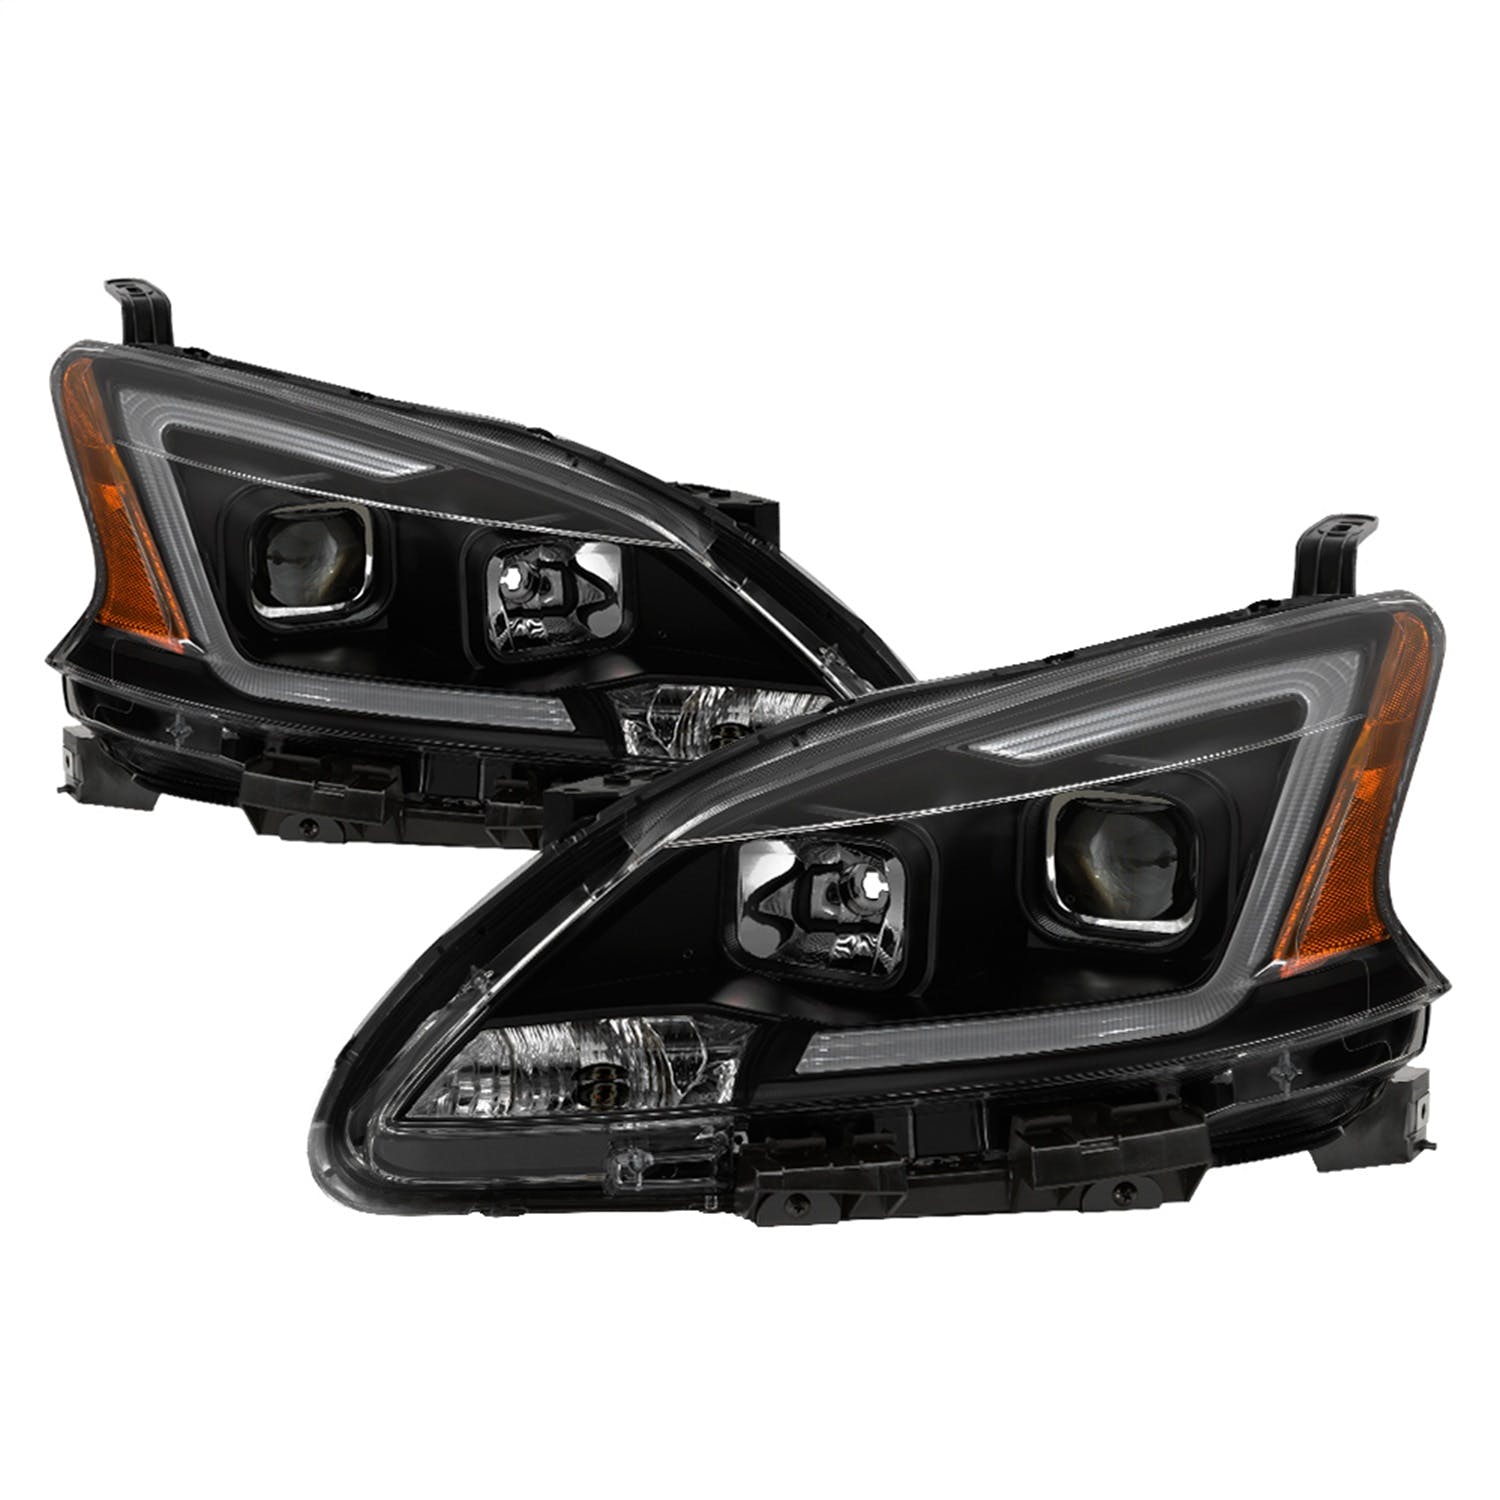 XTUNE POWER 9042973 Nissan Sentra 2013 2015 Halogen Models Only DRL LED Light Bar Projector Headlights Black Smoked Low Beam H7 ; High Beam H1 ; Signal 7440